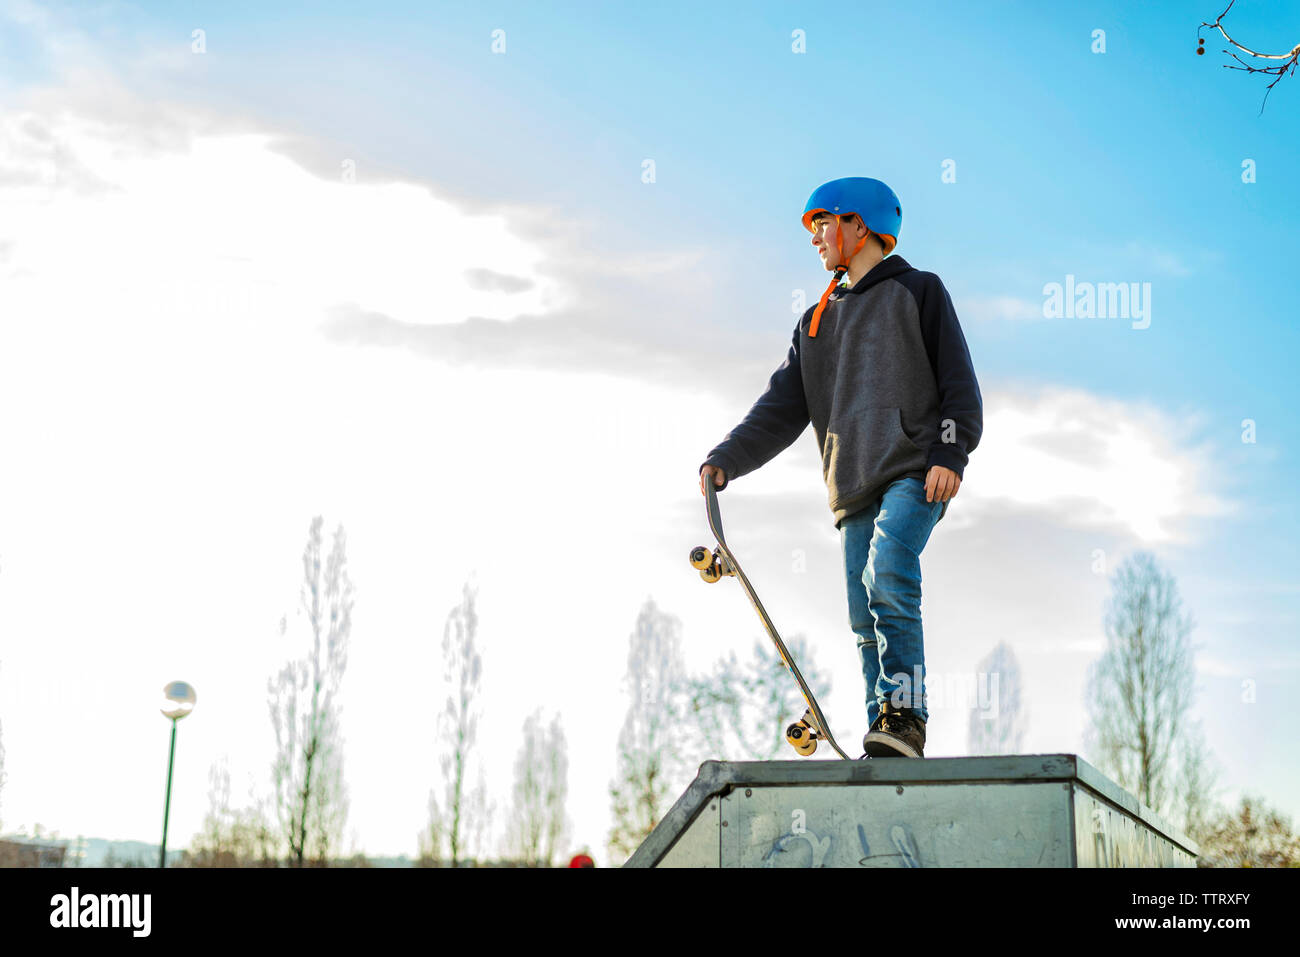 Low view of young skater on skate ramp ready to perform a trick Stock Photo